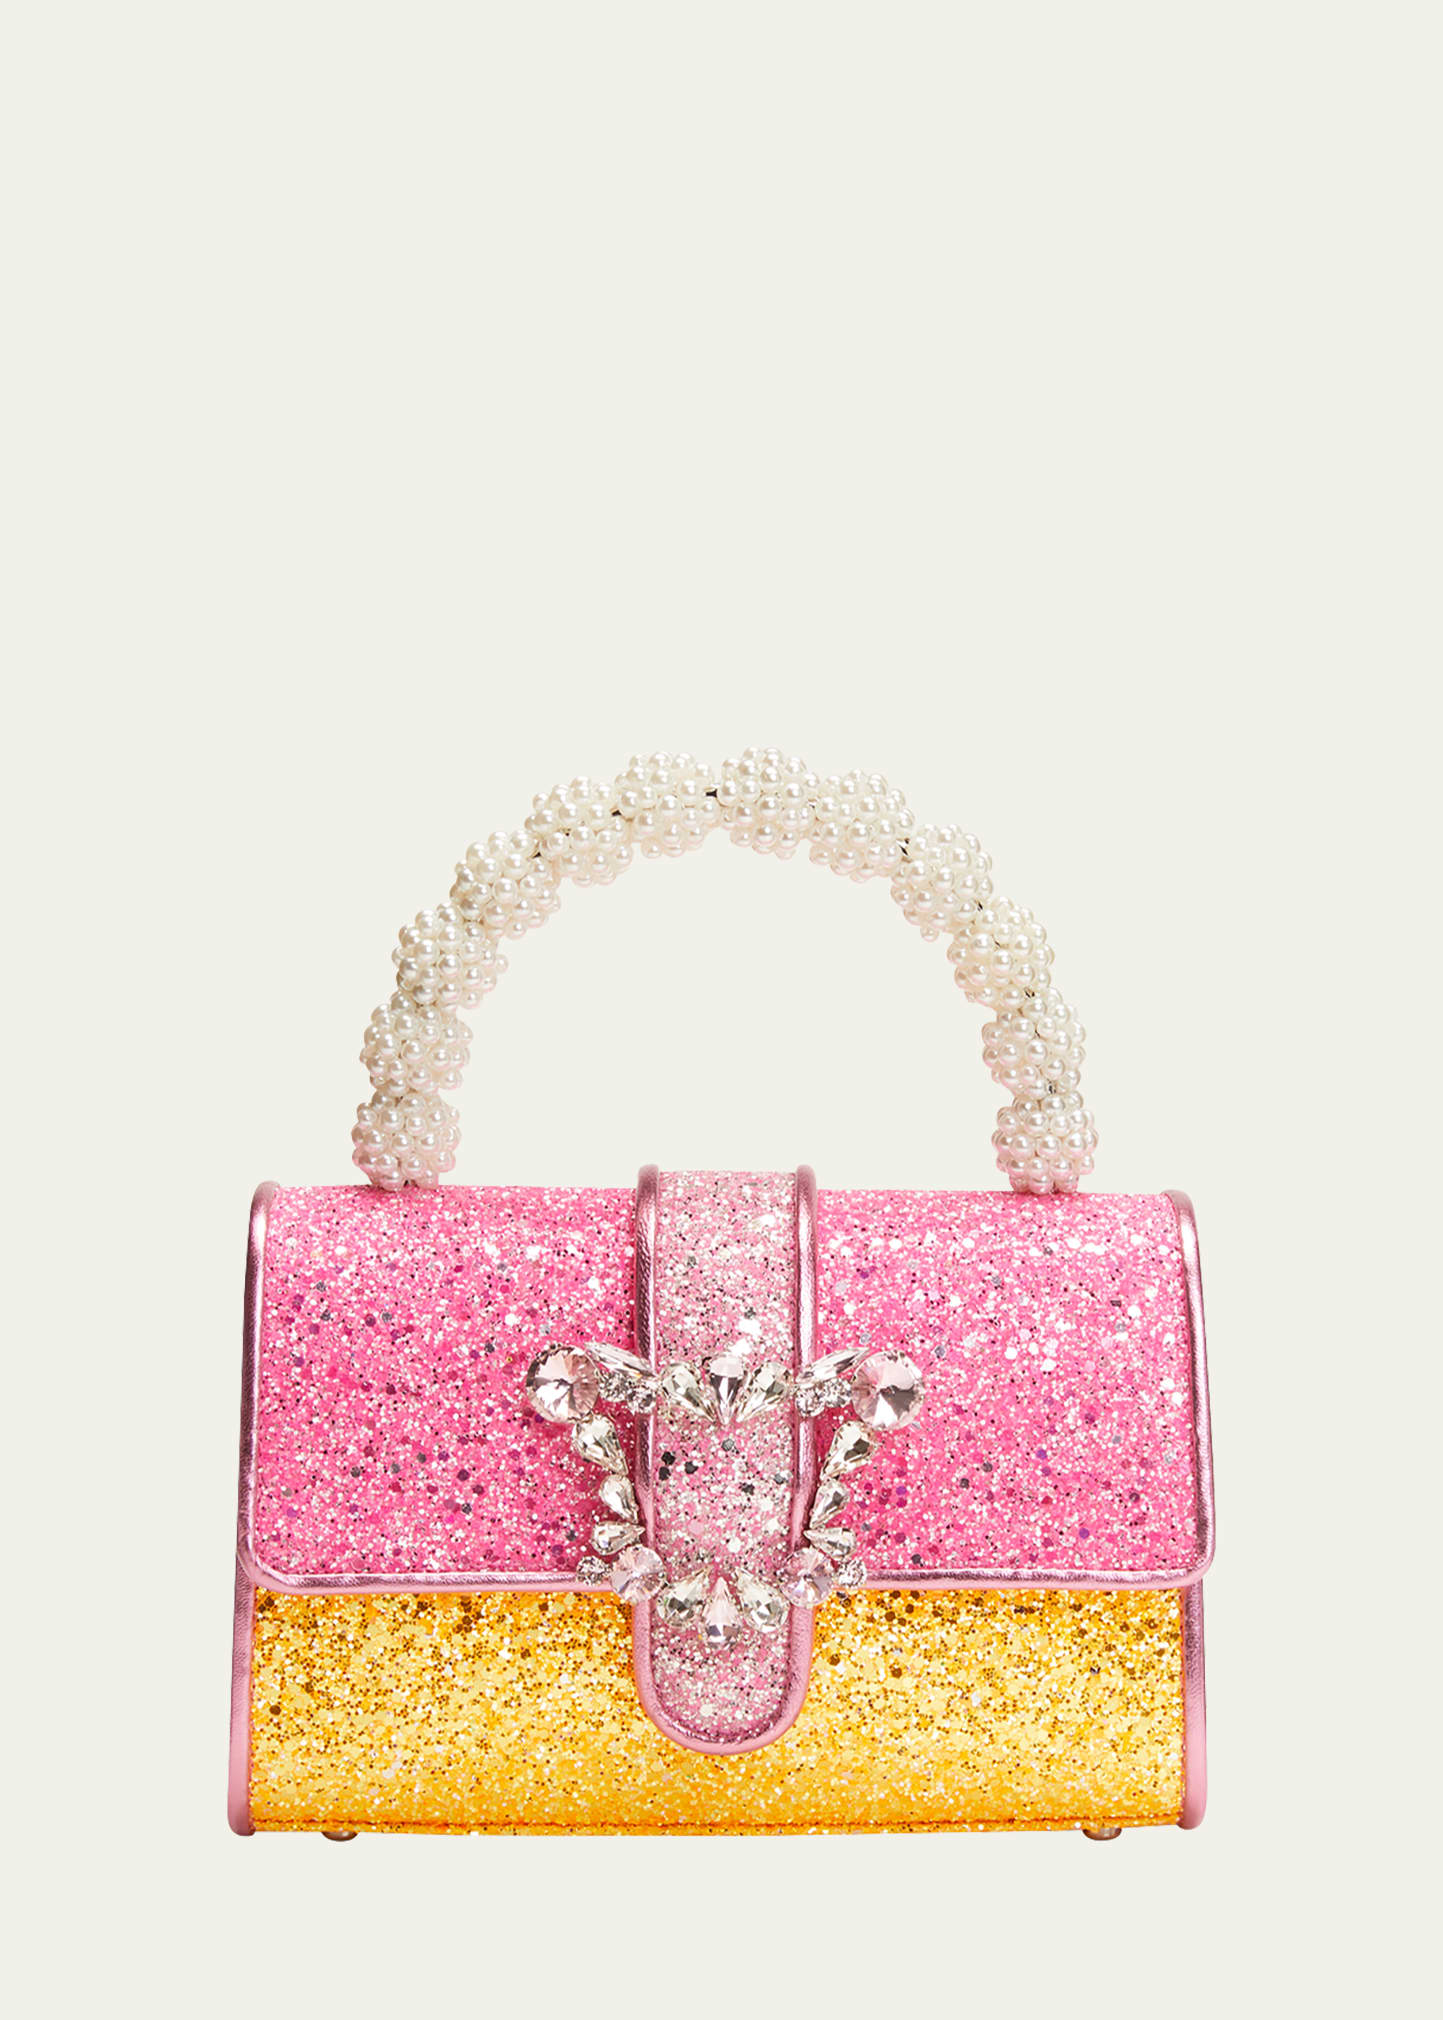 SOPHIA WEBSTER MARGAUX PEARLY GLITTERY TOP-HANDLE BAG